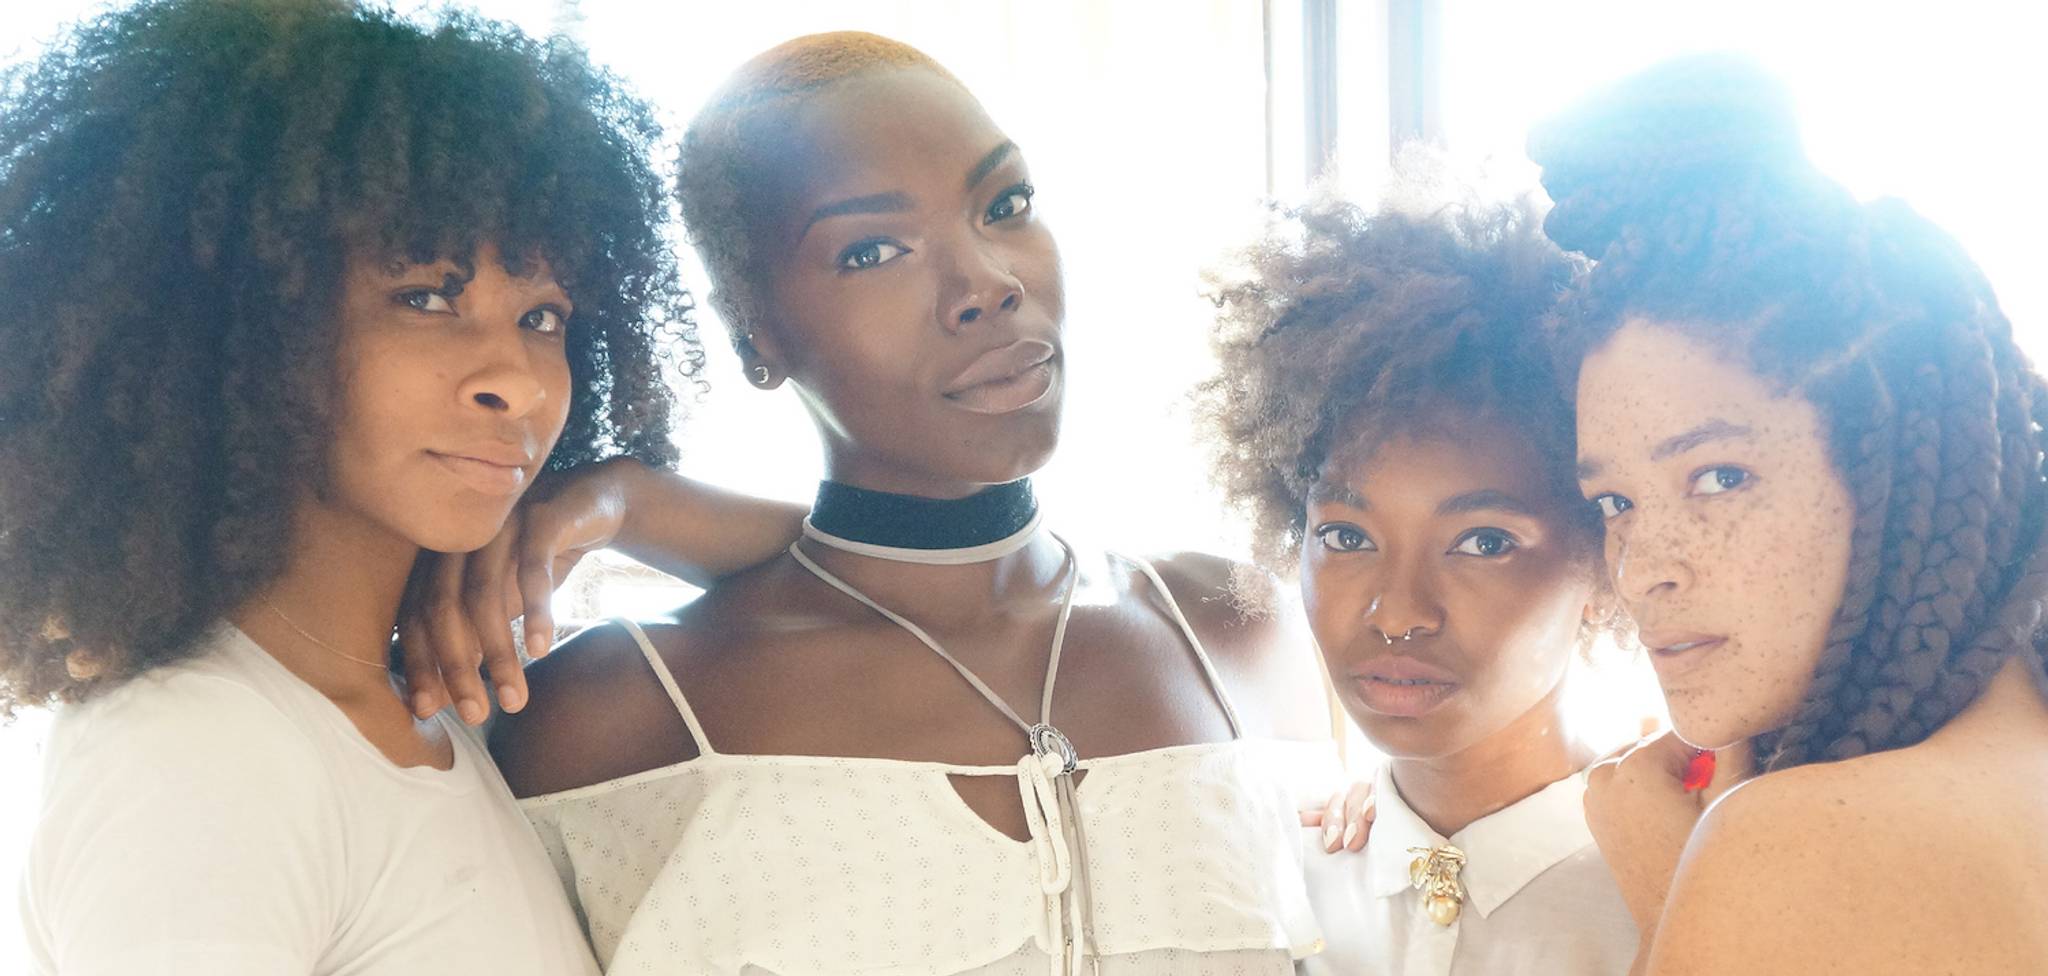 A beauty event for women of colour